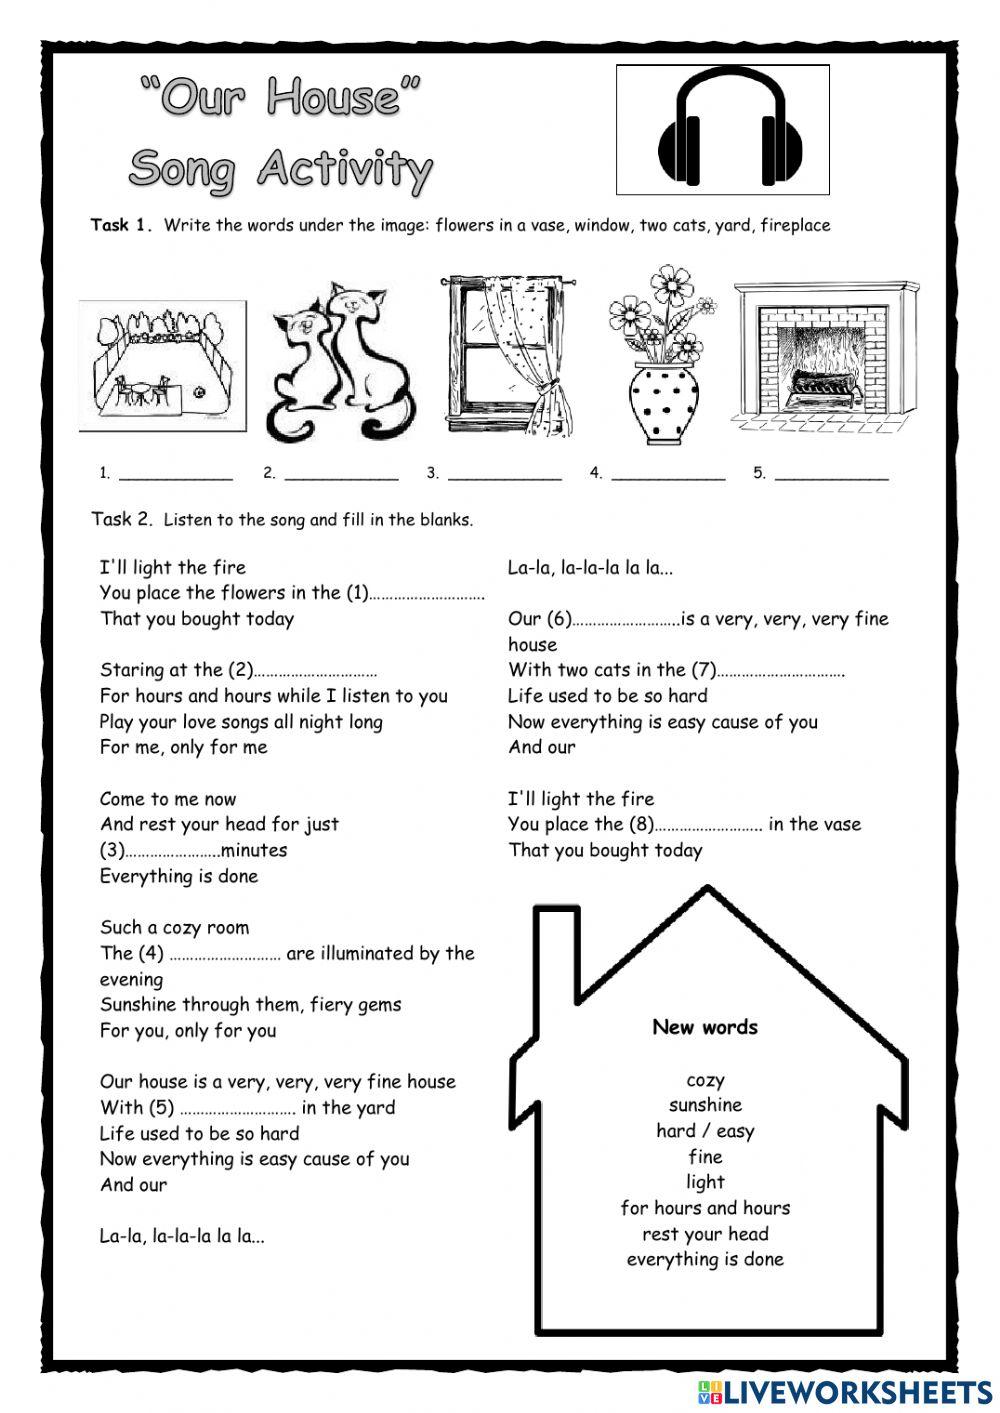 Our House Song Listening Activity